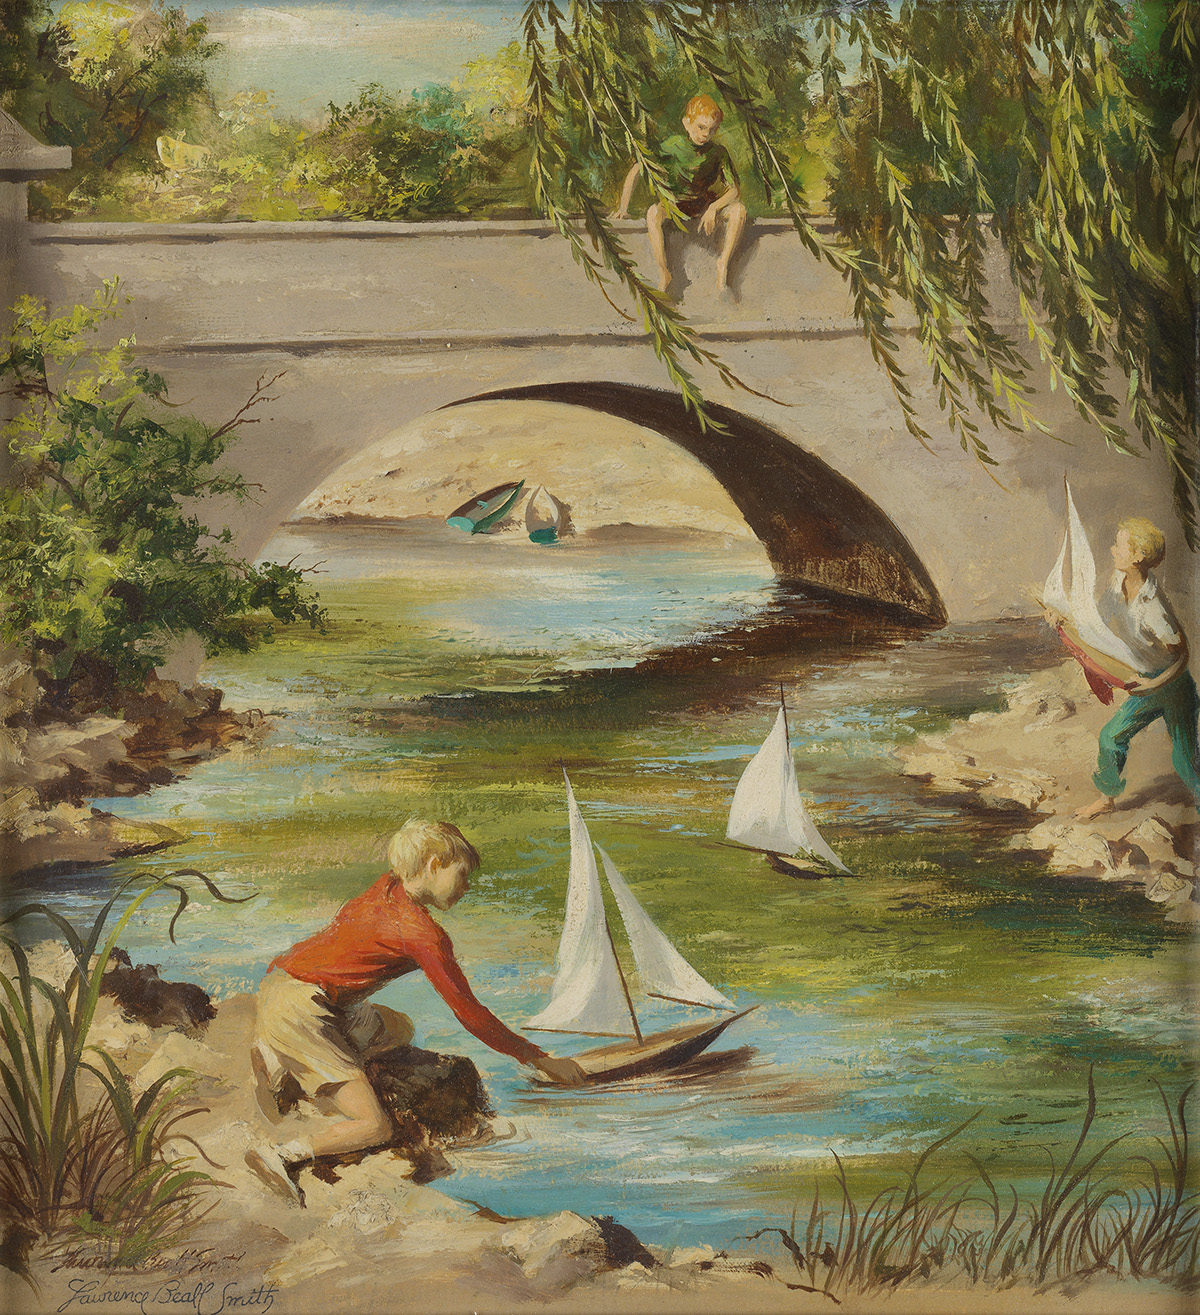 CHILDRENS LAWRENCE BEALL SMITH. Boys Playing with Sailboats.